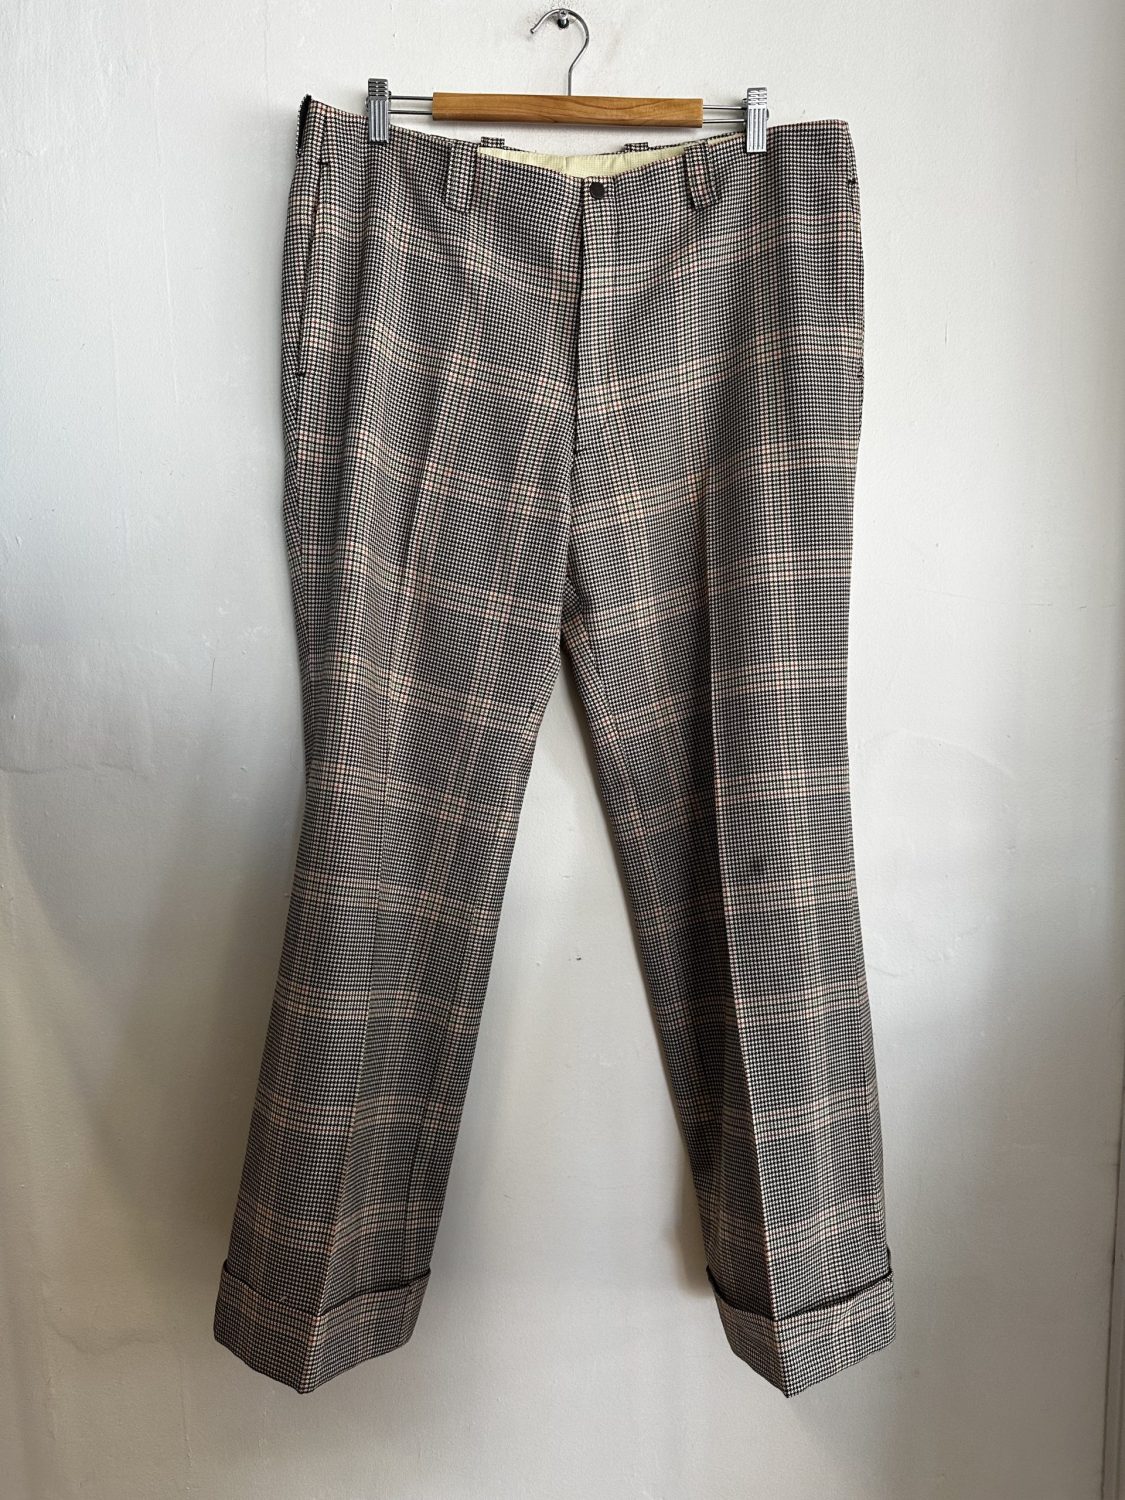 EXCELLENT FLETCHER JONES CHECKED HOUNDSTOOTH VINTAGE 70s FLARES | Chaos ...